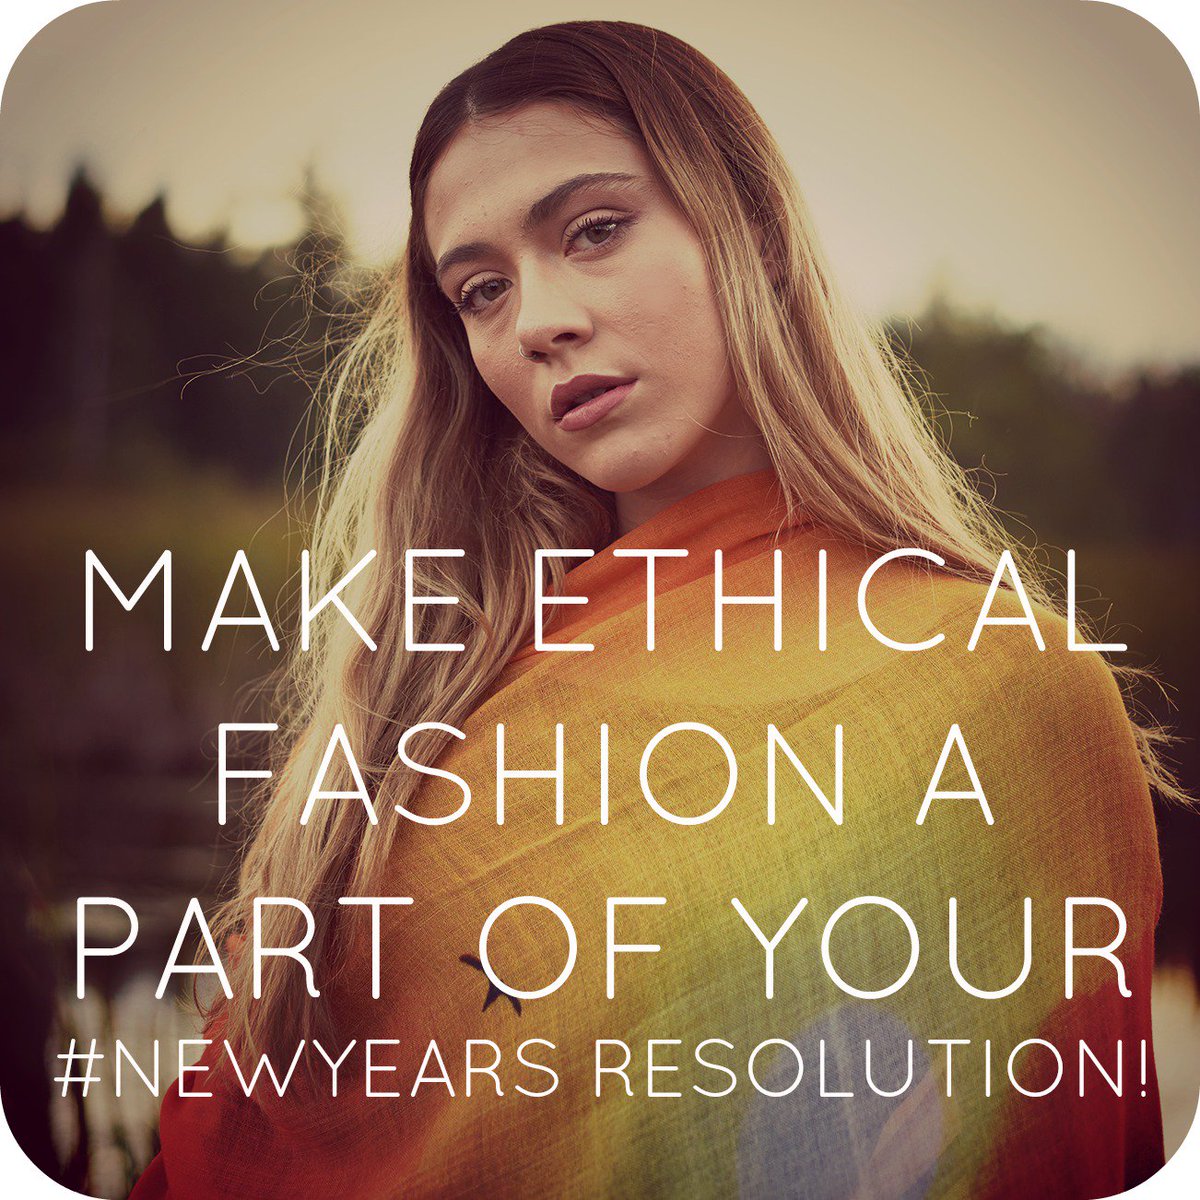 Make #buyingbetter and #ethicallymadefashion a part of your #NewYearsResolution! #chobhi